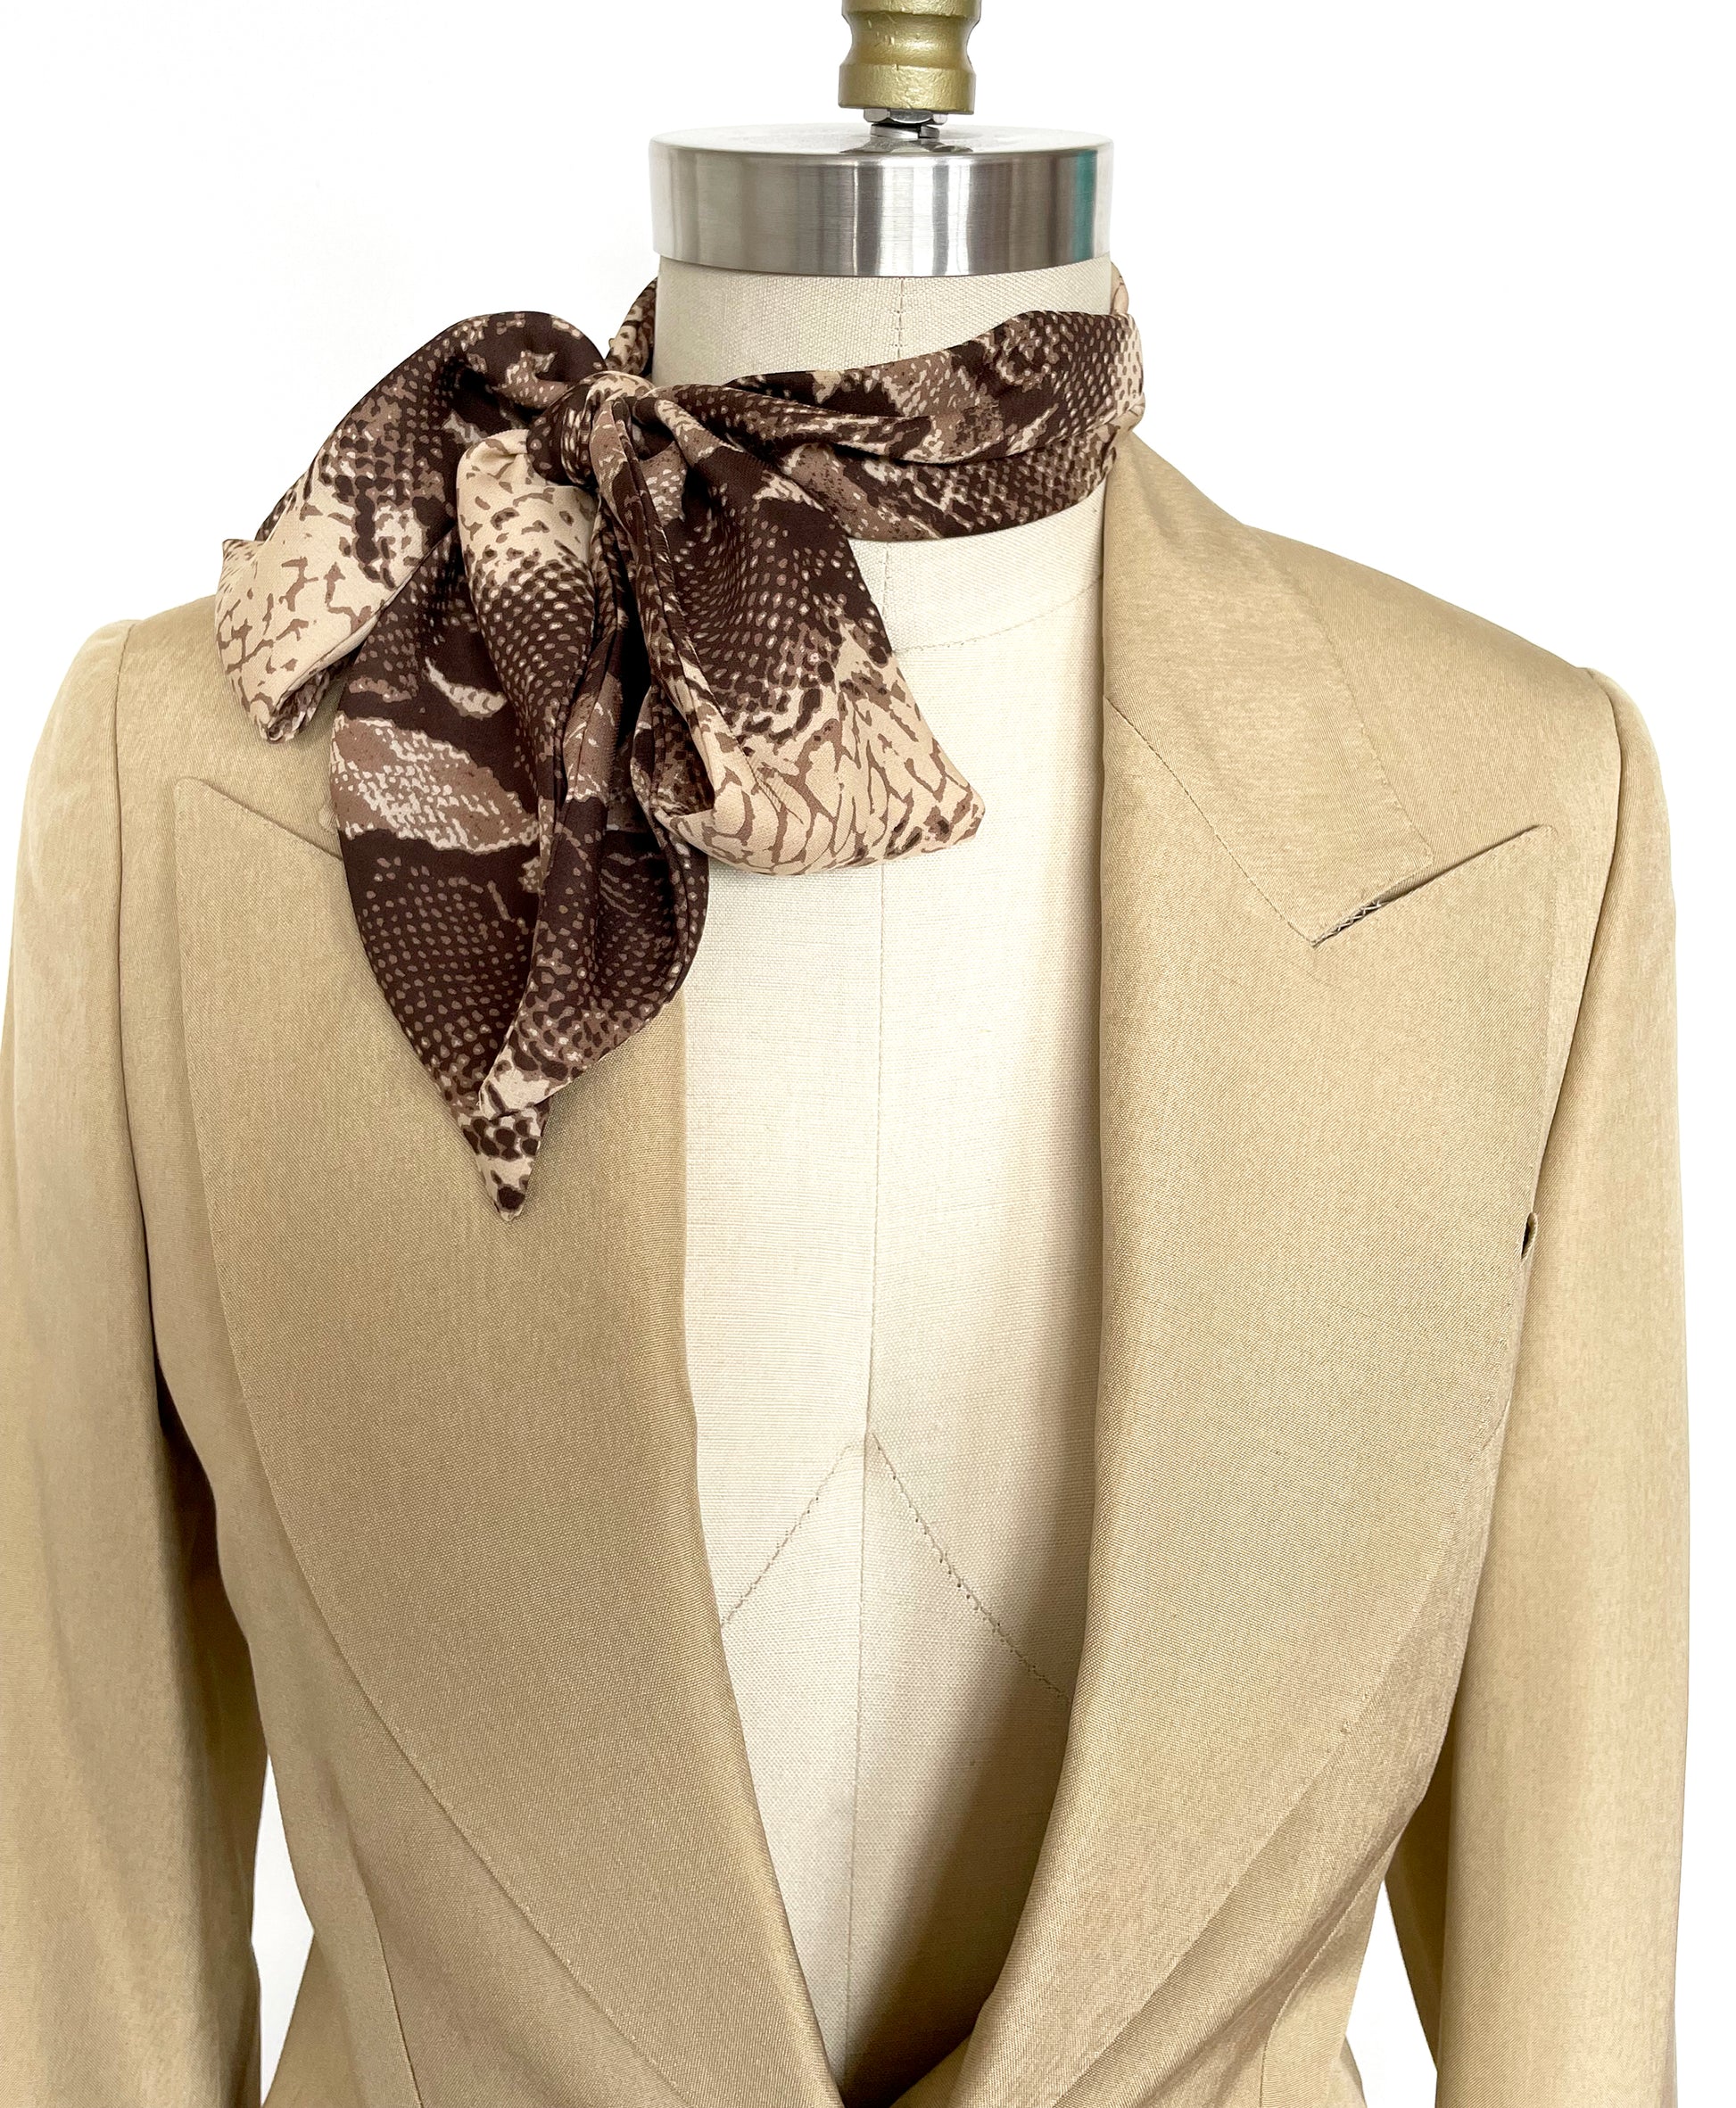 Thin silk scarf for women with brown and tan snakeskin print